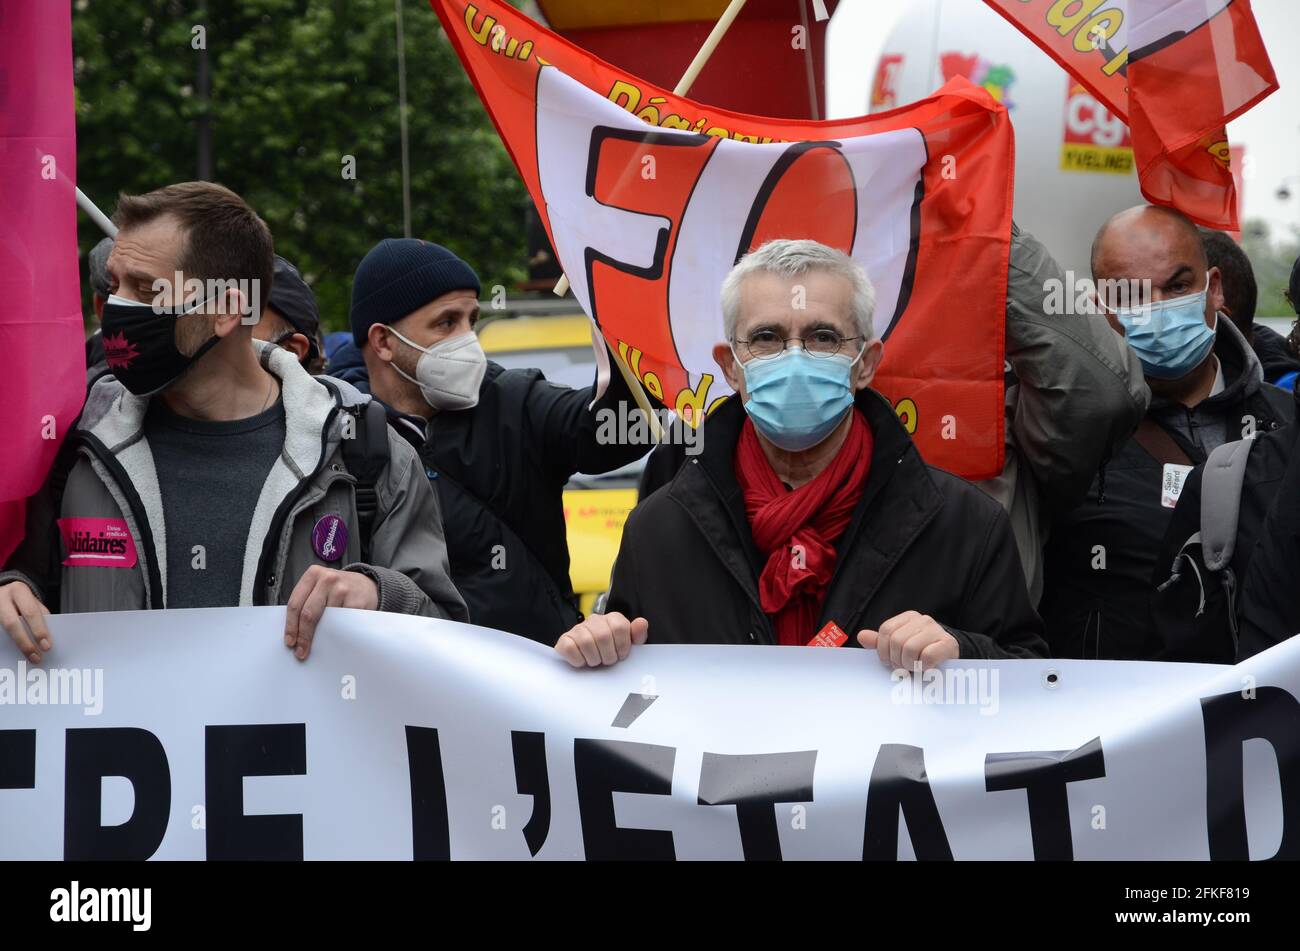 May Day parade in Paris, in a climate of tension from the start. Blackbocks' hindered the smooth running of the trade unions' march despite police Stock Photo